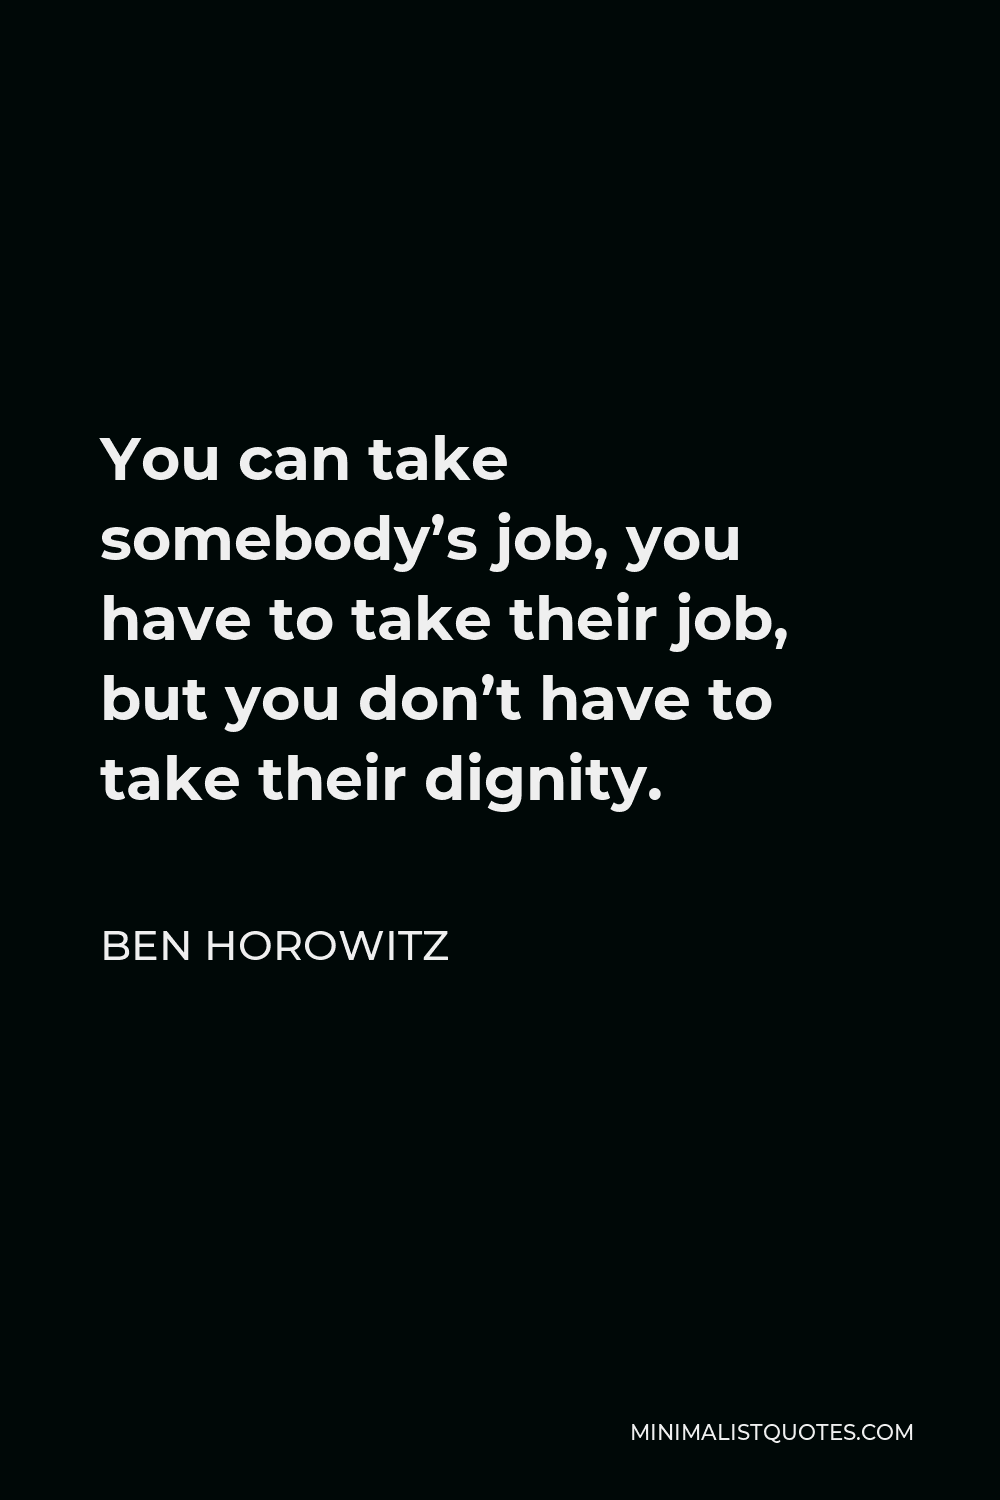 Ben Horowitz Quote - You can take somebody’s job, you have to take their job, but you don’t have to take their dignity.